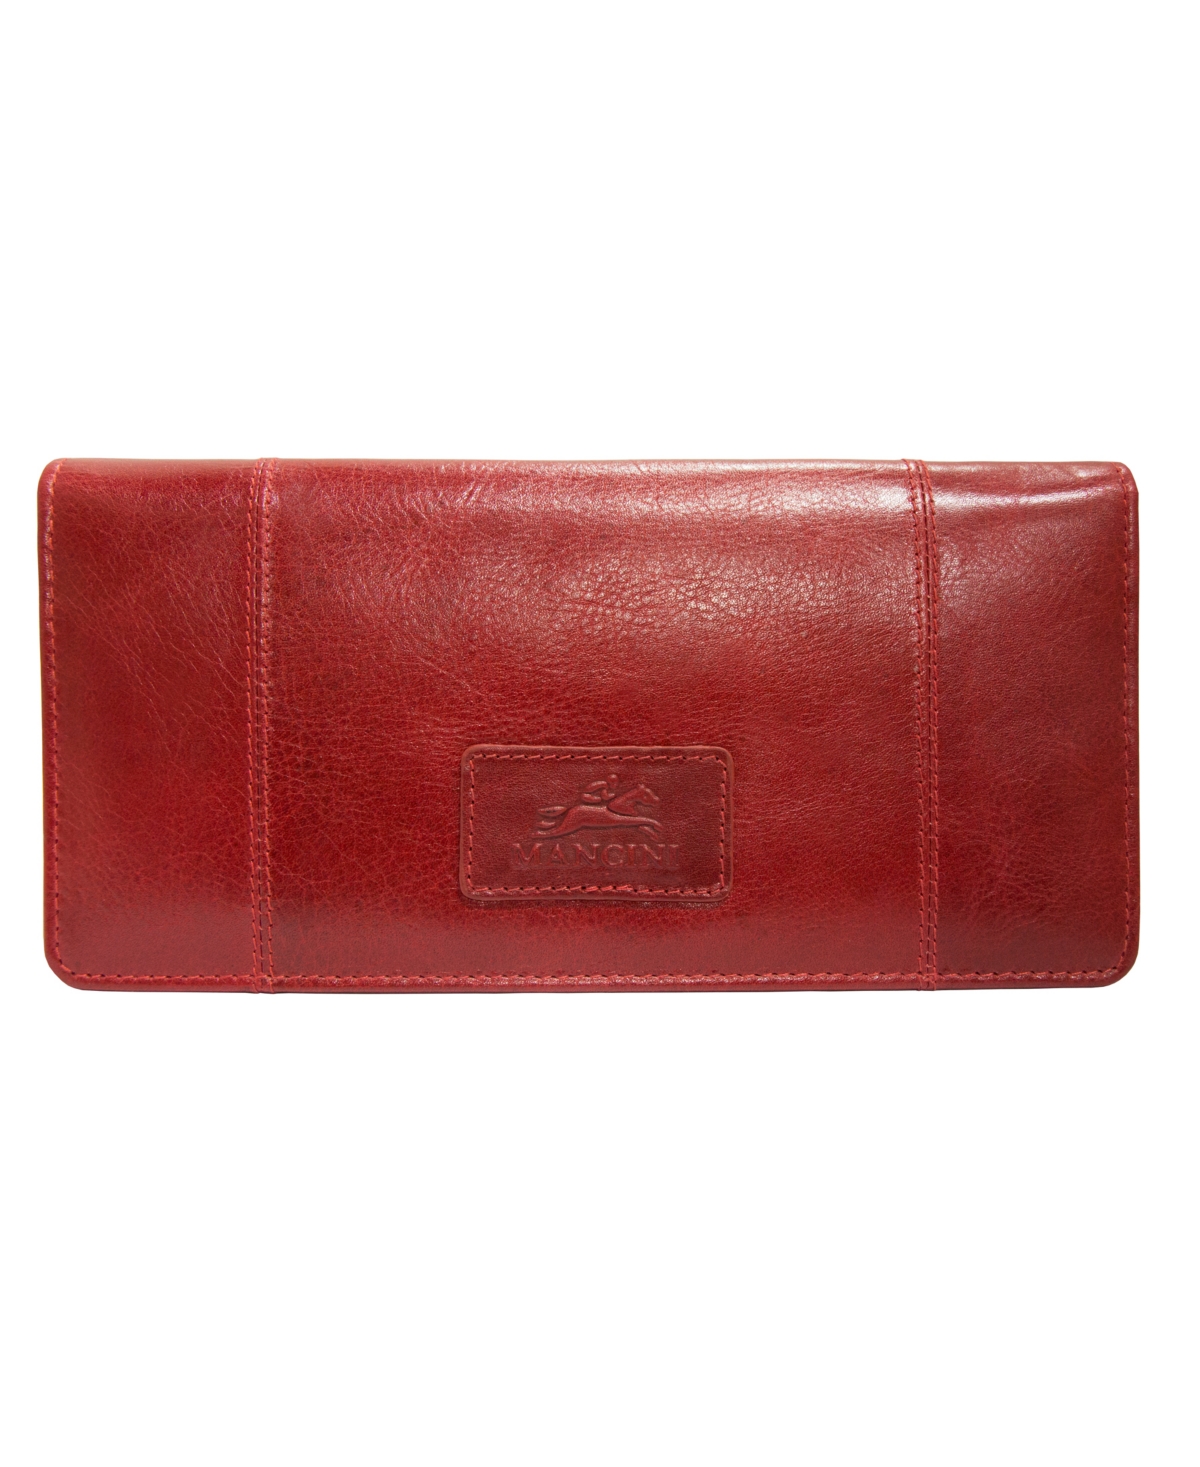 Casablanca Collection Rfid Secure Ladies Trifold Wallet - Camel